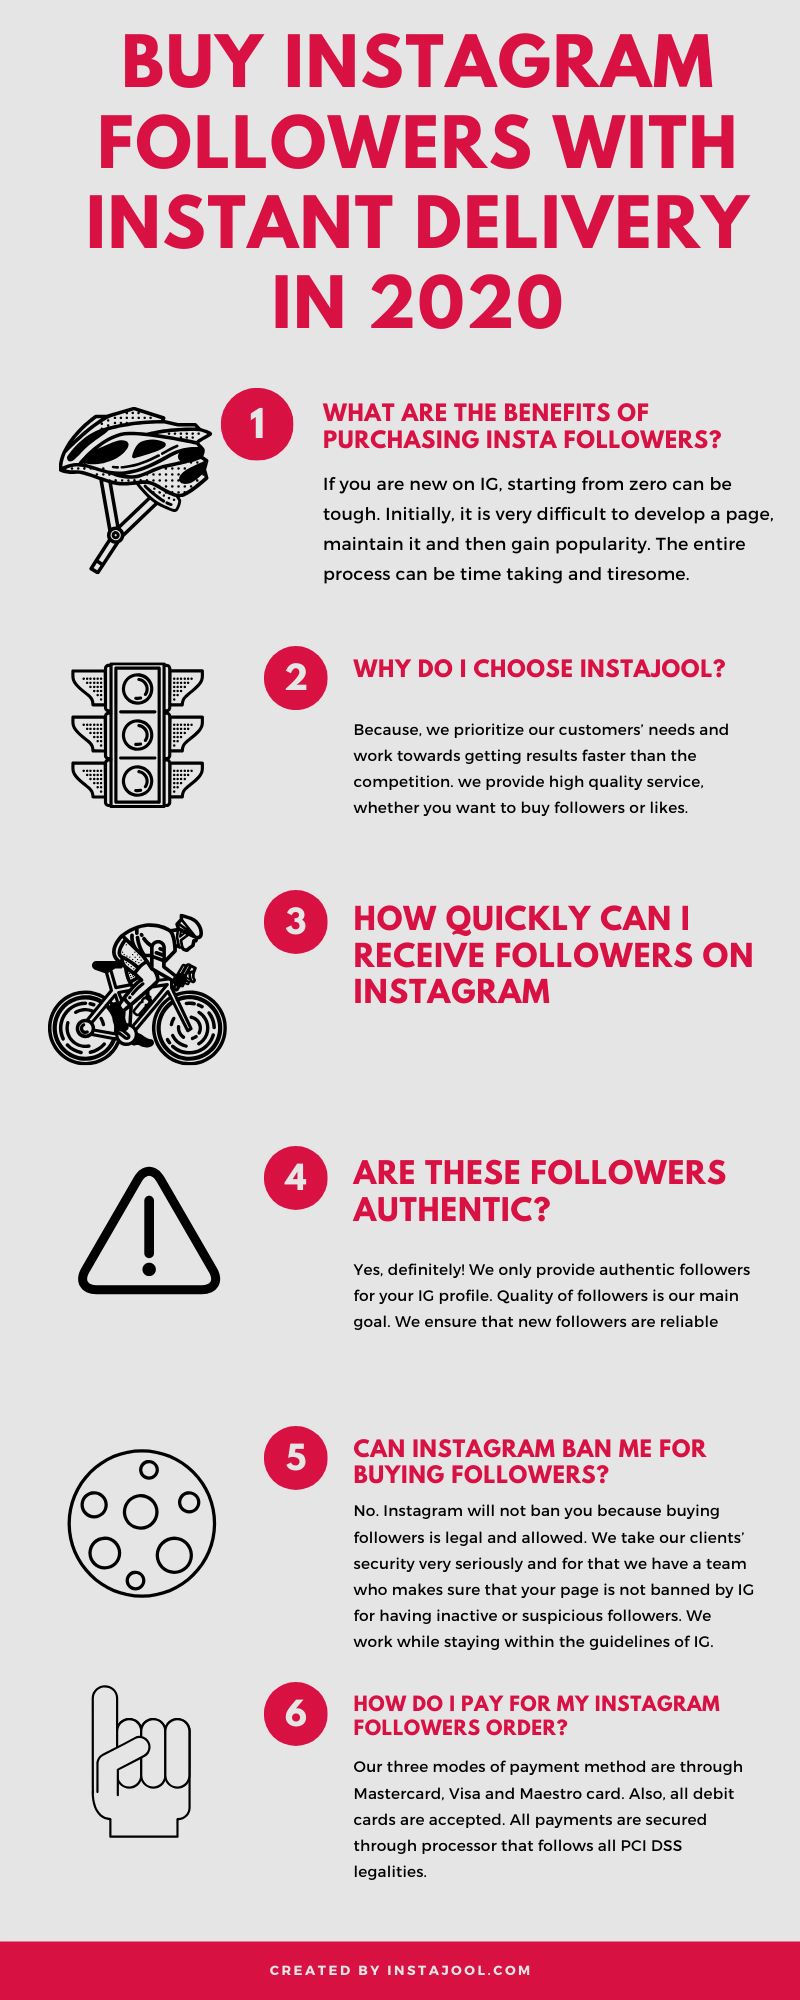 Buy Instagram Followers with Instant Delivery in 2020 Infographic by Instajool.com.png